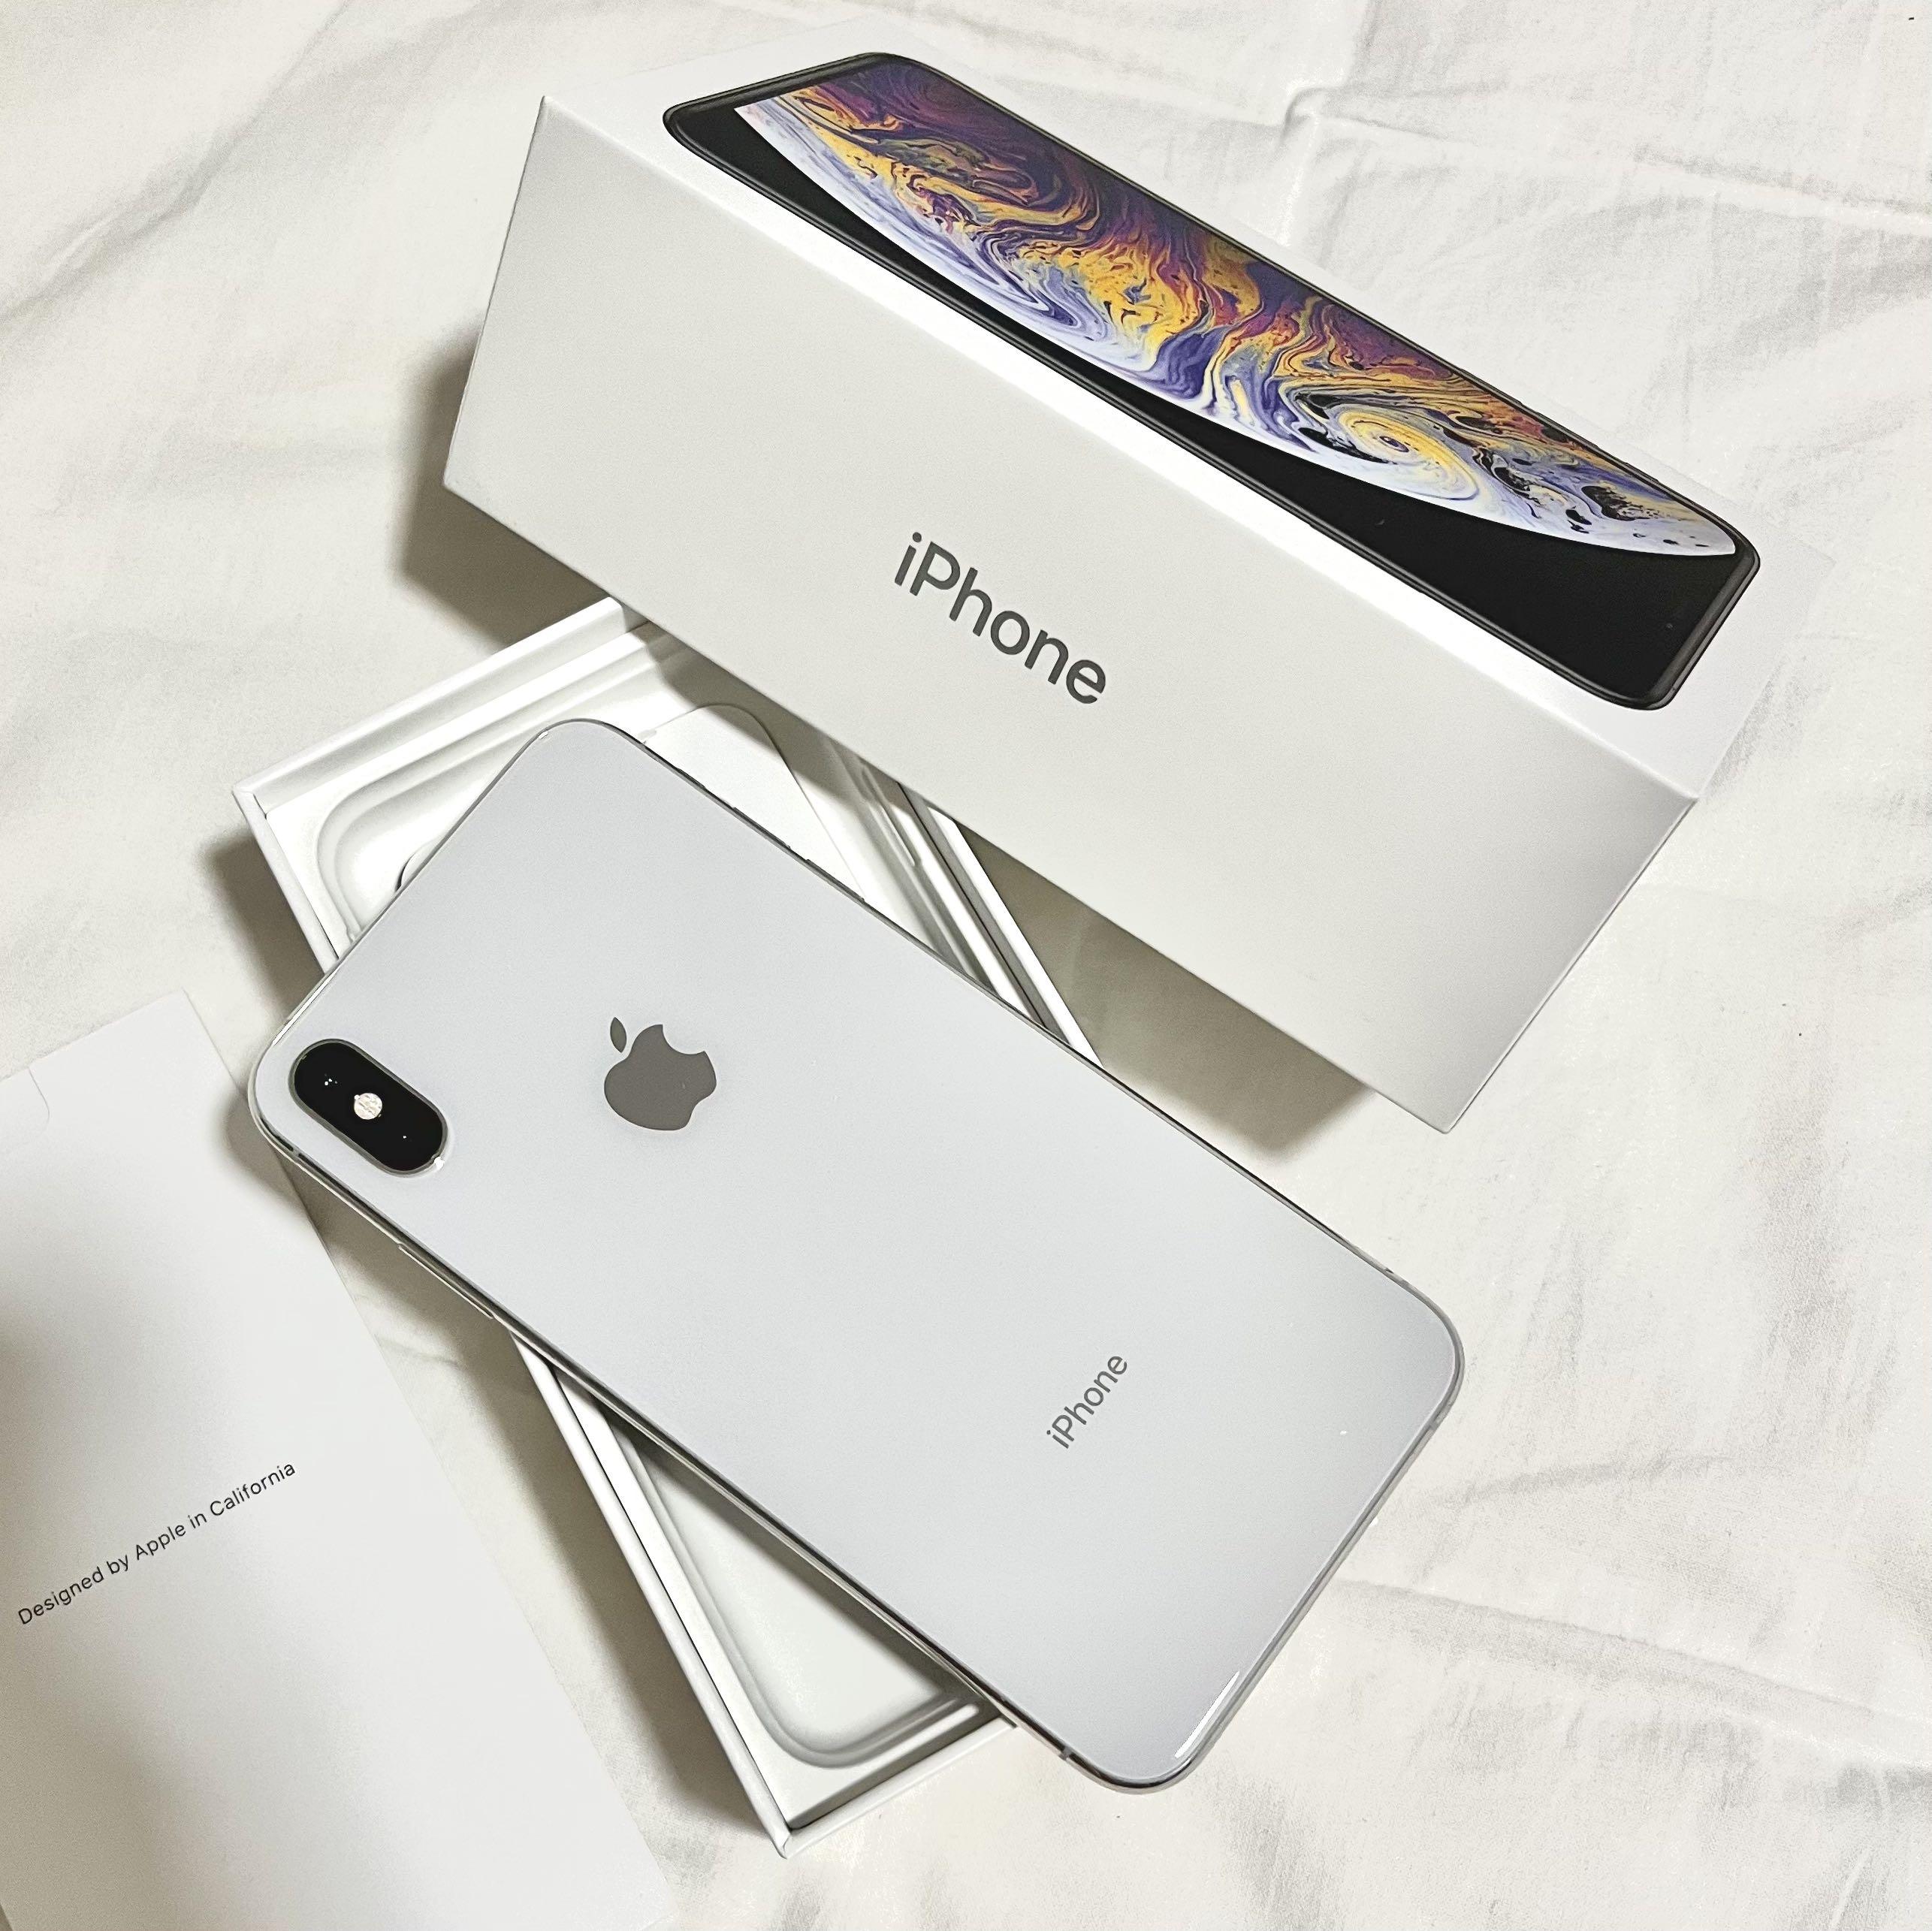 IPHONE XS MAX 64GB SILVER WHITE, Mobile Phones  Gadgets, Mobile Phones,  iPhone, iPhone X Series on Carousell